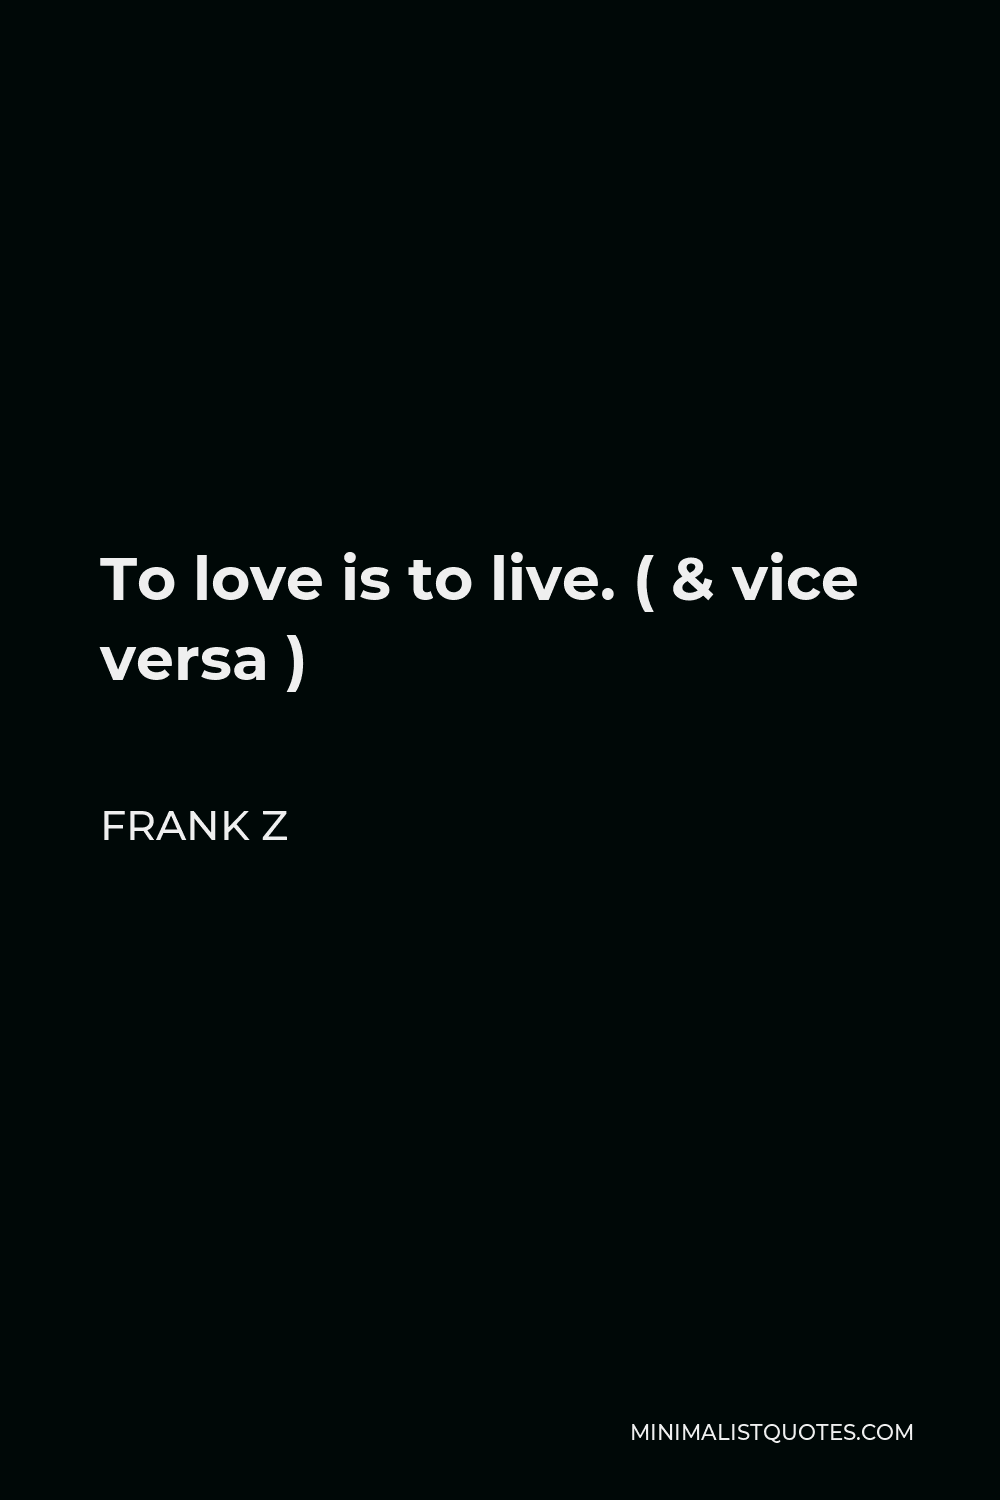 Frank Z Quote - To love is to live. ( & vice versa )